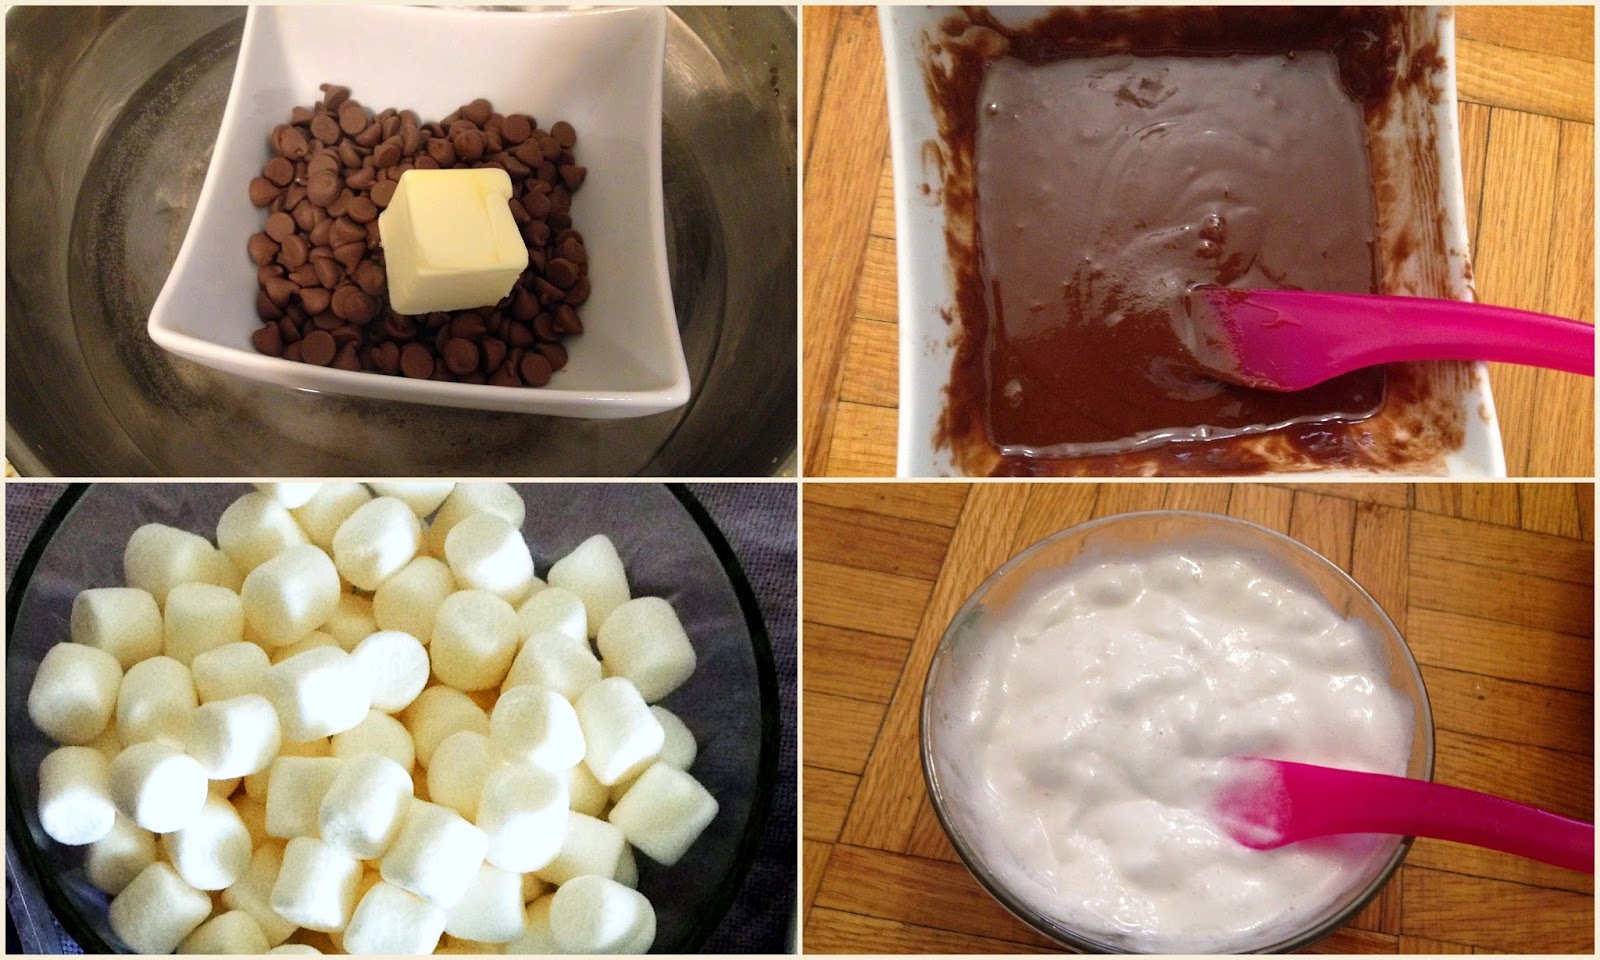 Chocolate and Marshmallow Dip